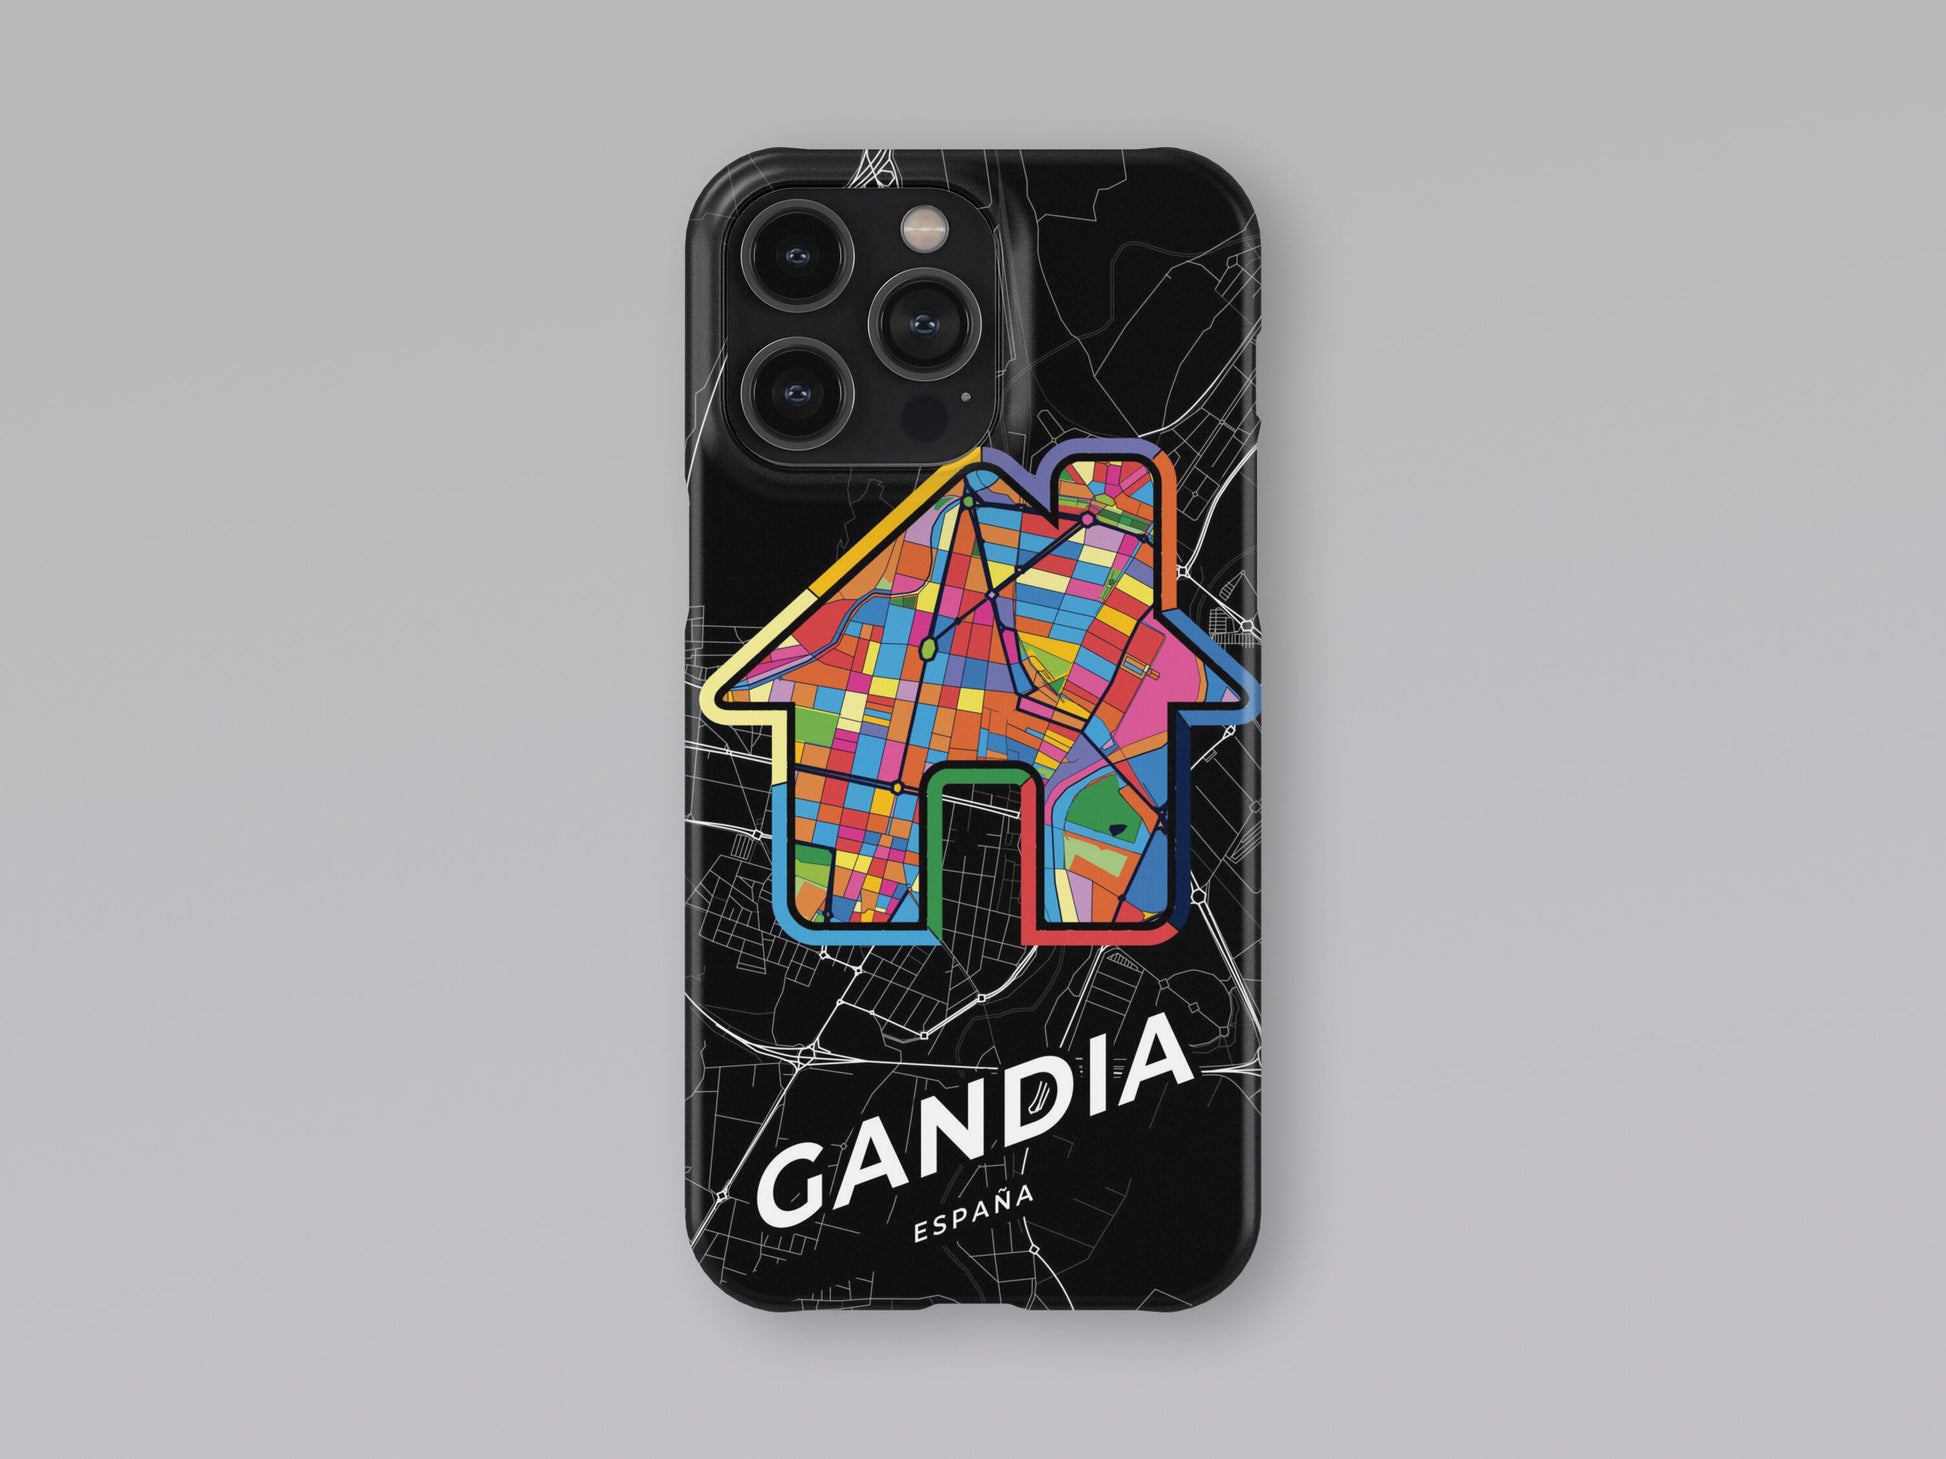 Gandia Spain slim phone case with colorful icon. Birthday, wedding or housewarming gift. Couple match cases. 3